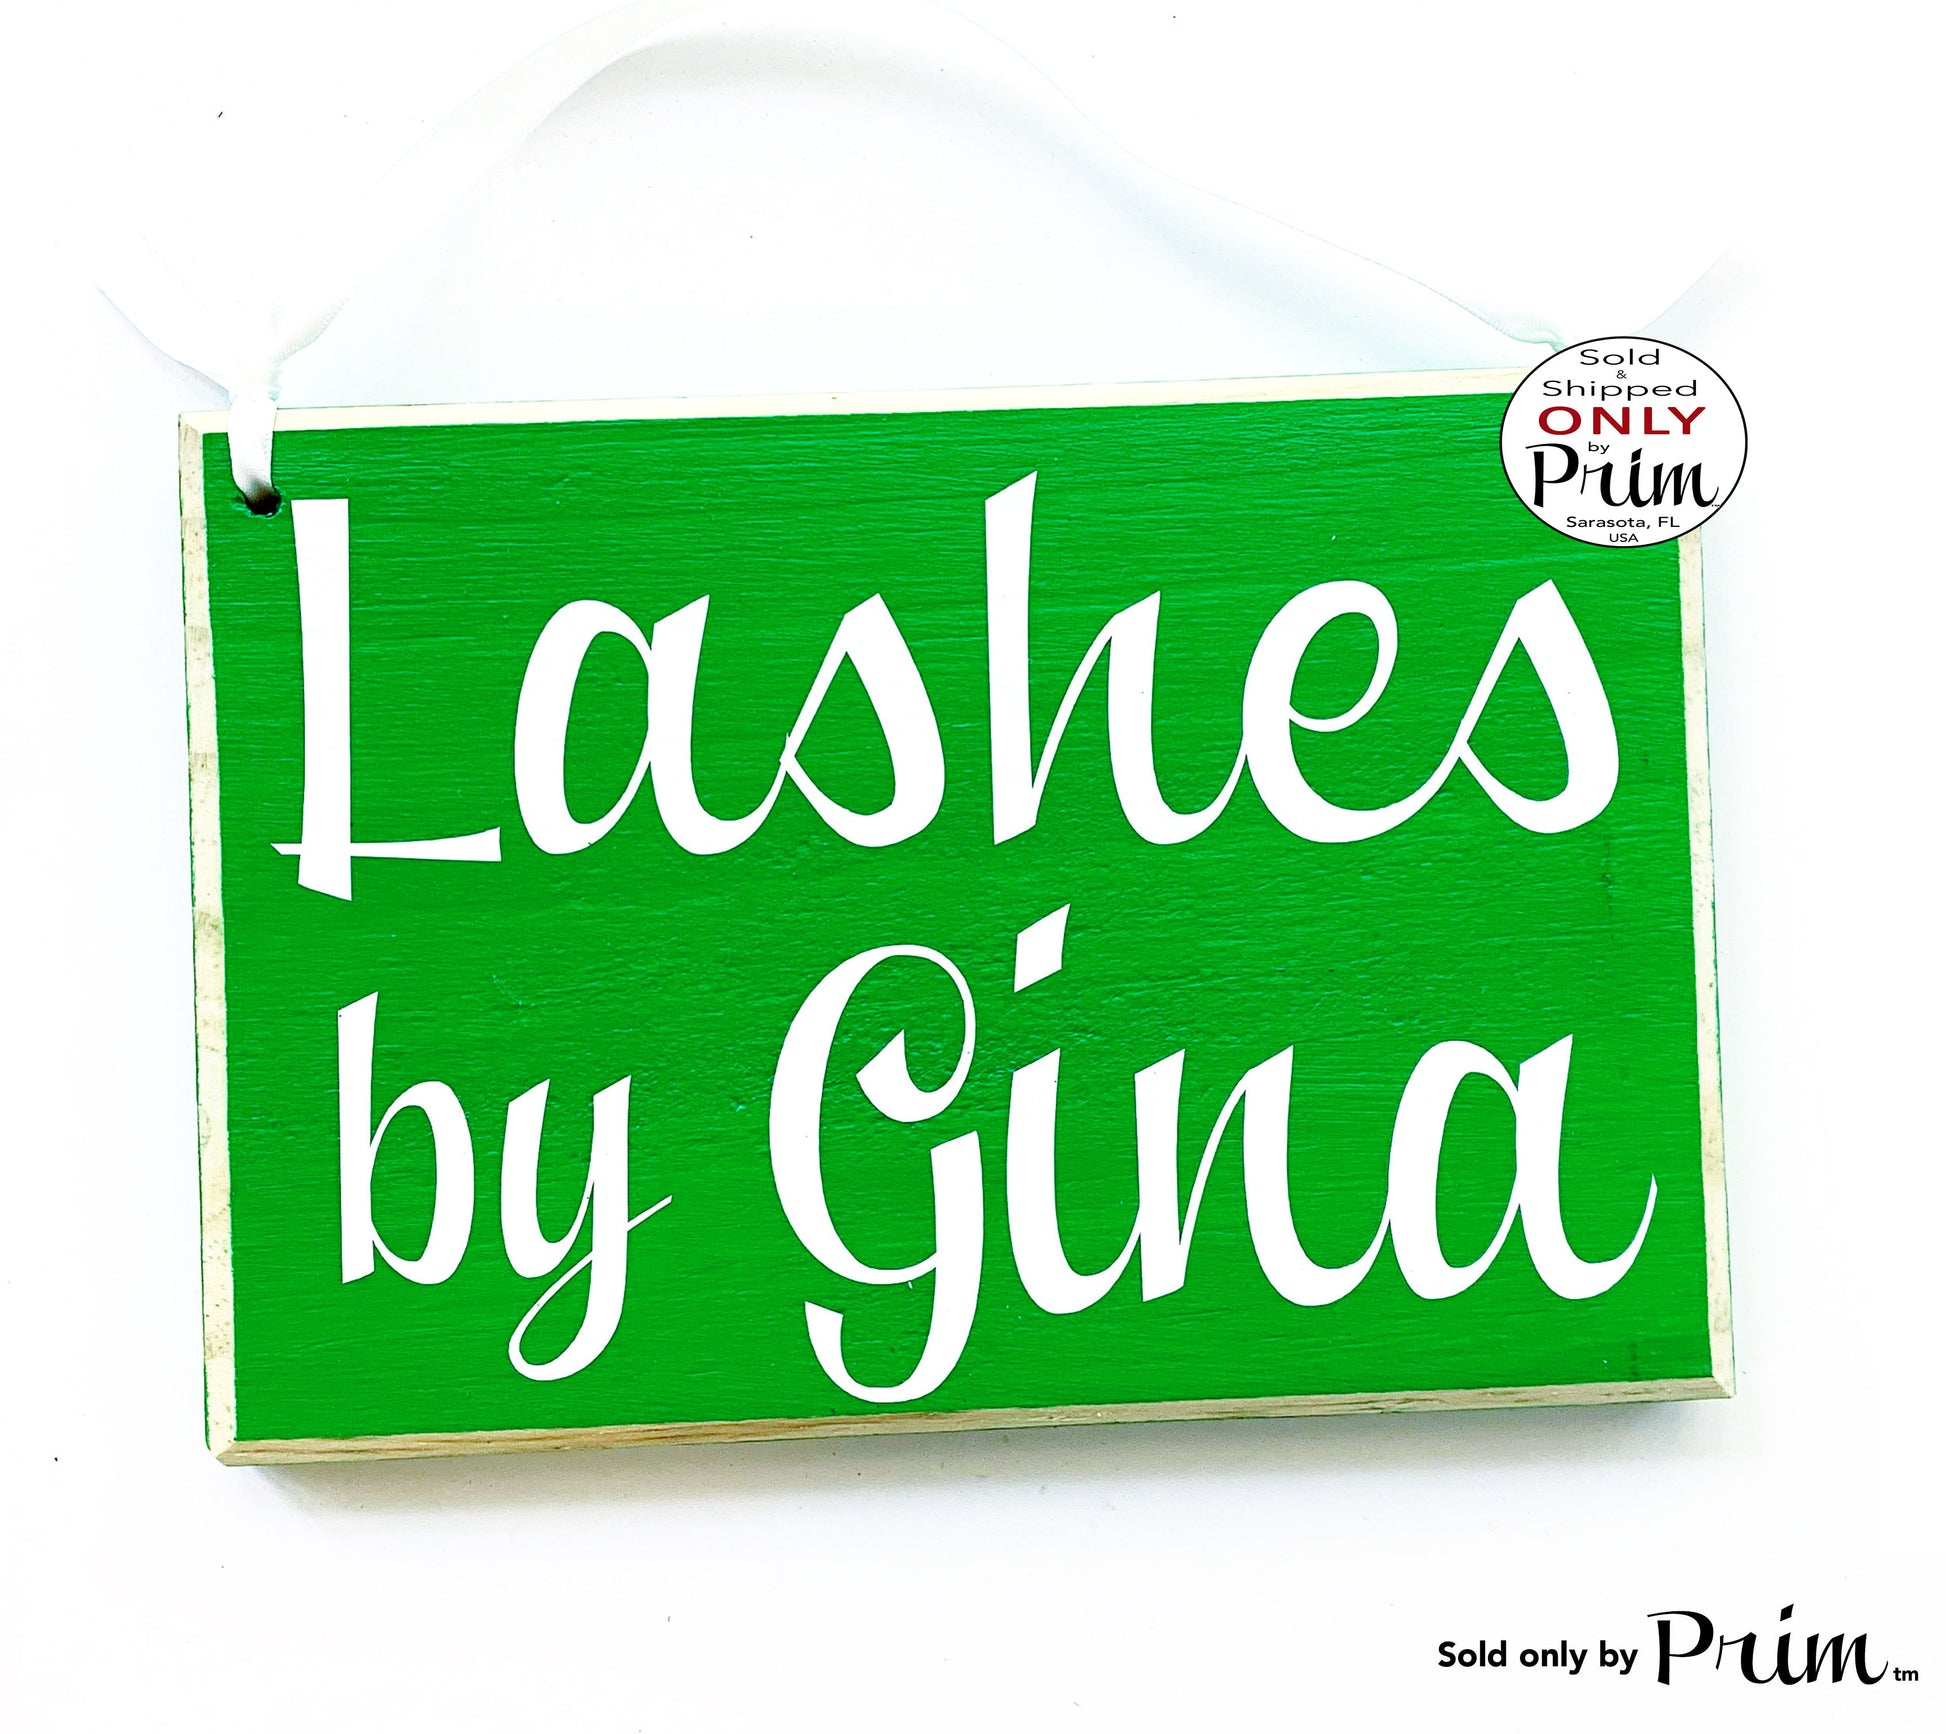 8x6 Lashes by Name Personazlized Custom Wood Sign In Session Progress Please Do Not Disturb Lashes Extensions Eyebrows Salon Door Plaque Designs by Prim